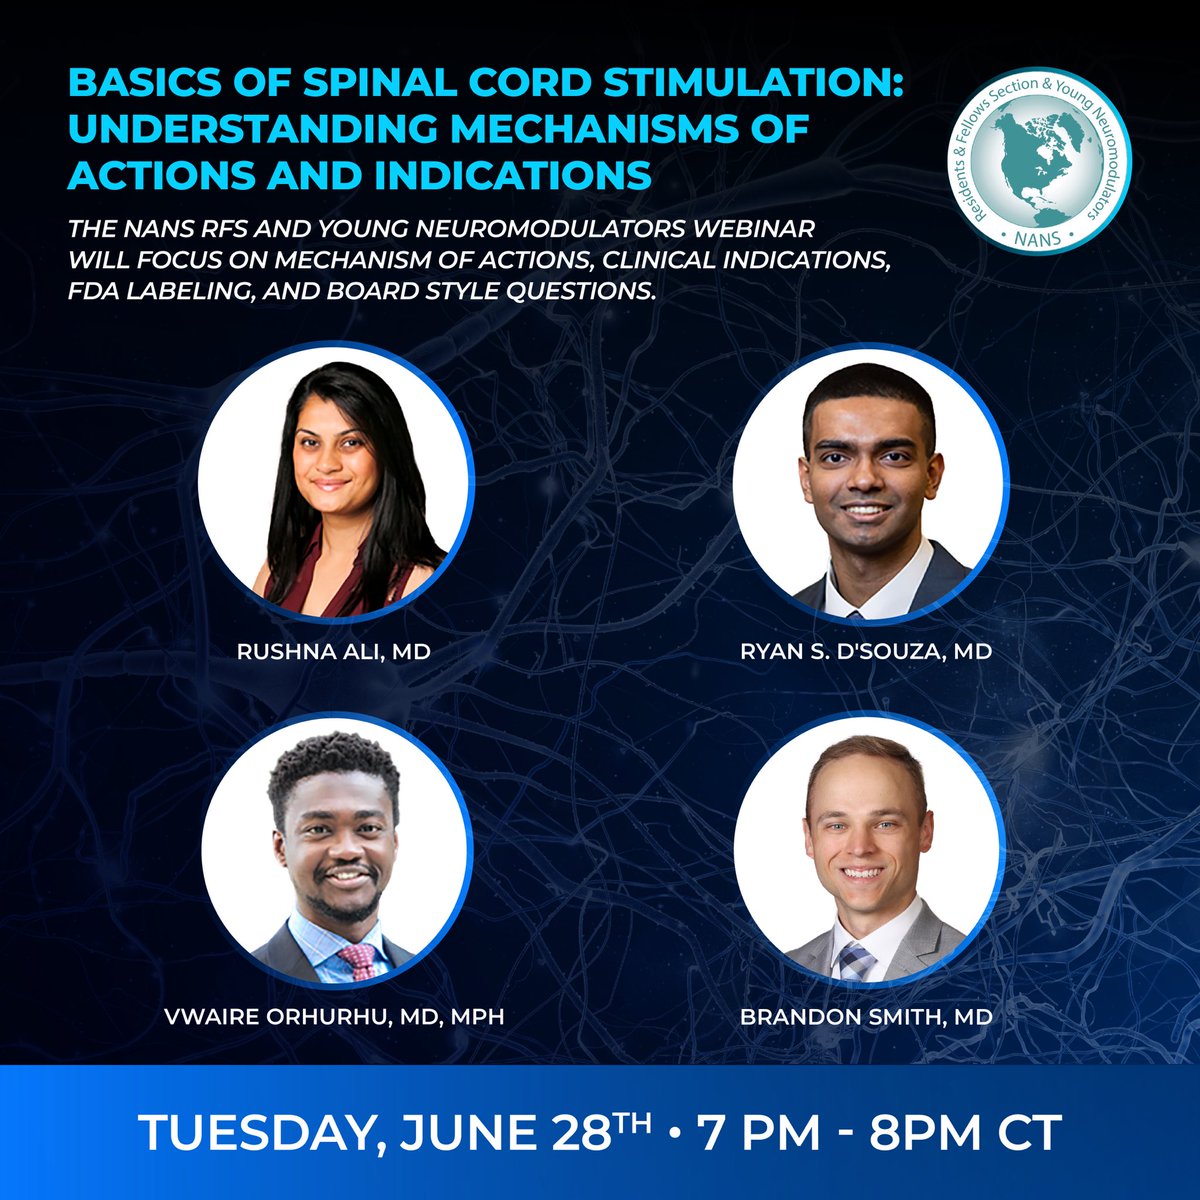 Interested in pearls on #neuromodulation? Want to review questions for #pain boards? Consider registering for this upcoming webinar! Content geared toward trainees but open to everyone! register.gotowebinar.com/register/83069… @JuliePilitsis @SMoeschlerMD @RushnaAli6 @VwaireO @Dr_Ankur_Patel